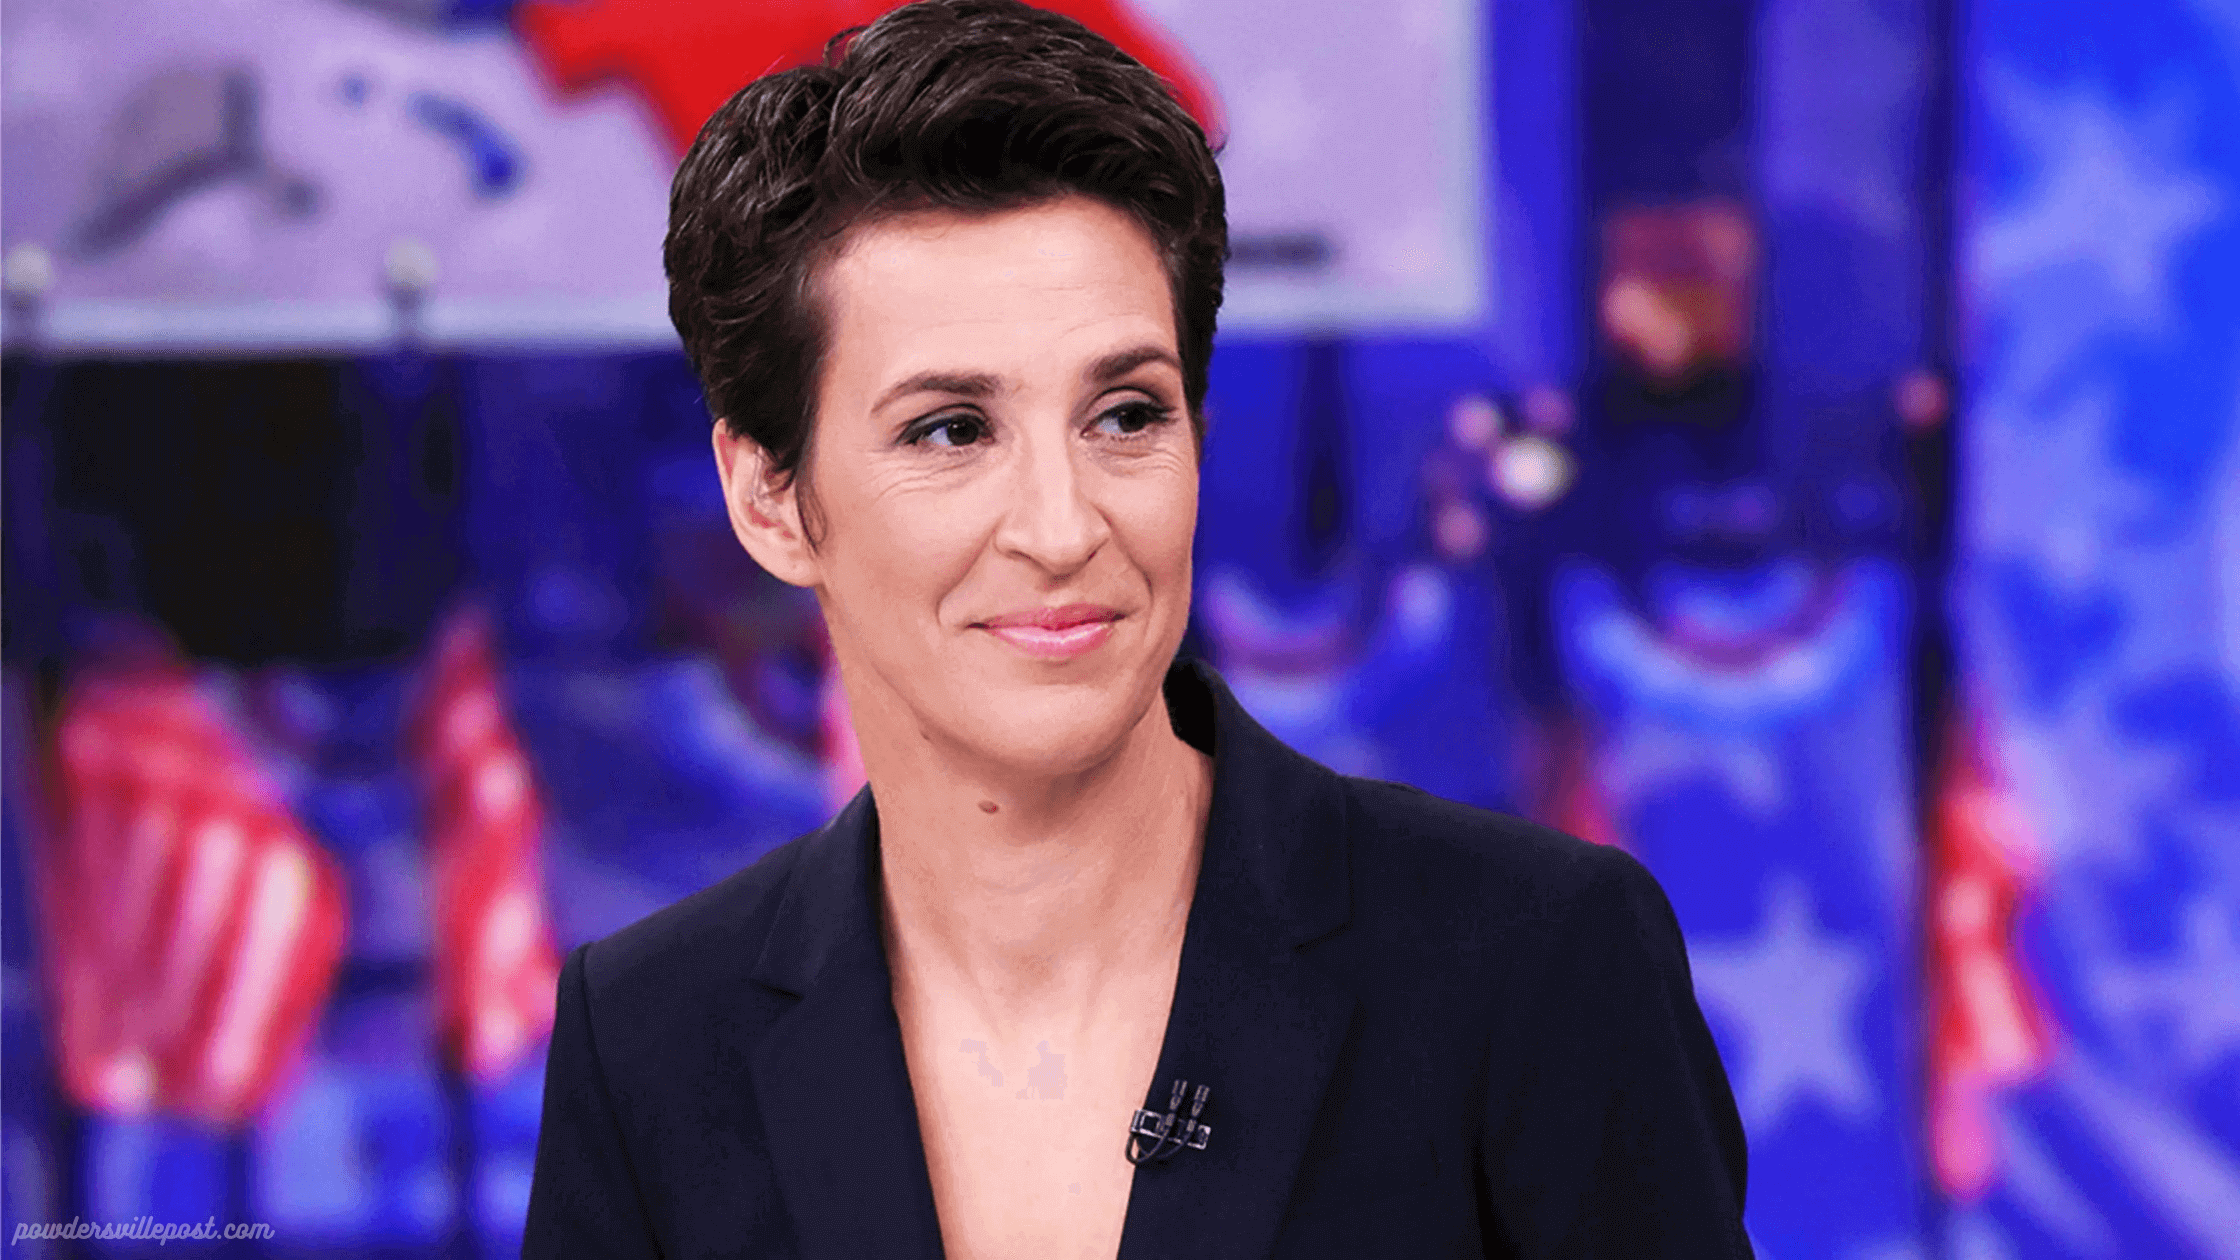 Why Doesn’t Rachel Maddow Appear On Her Show